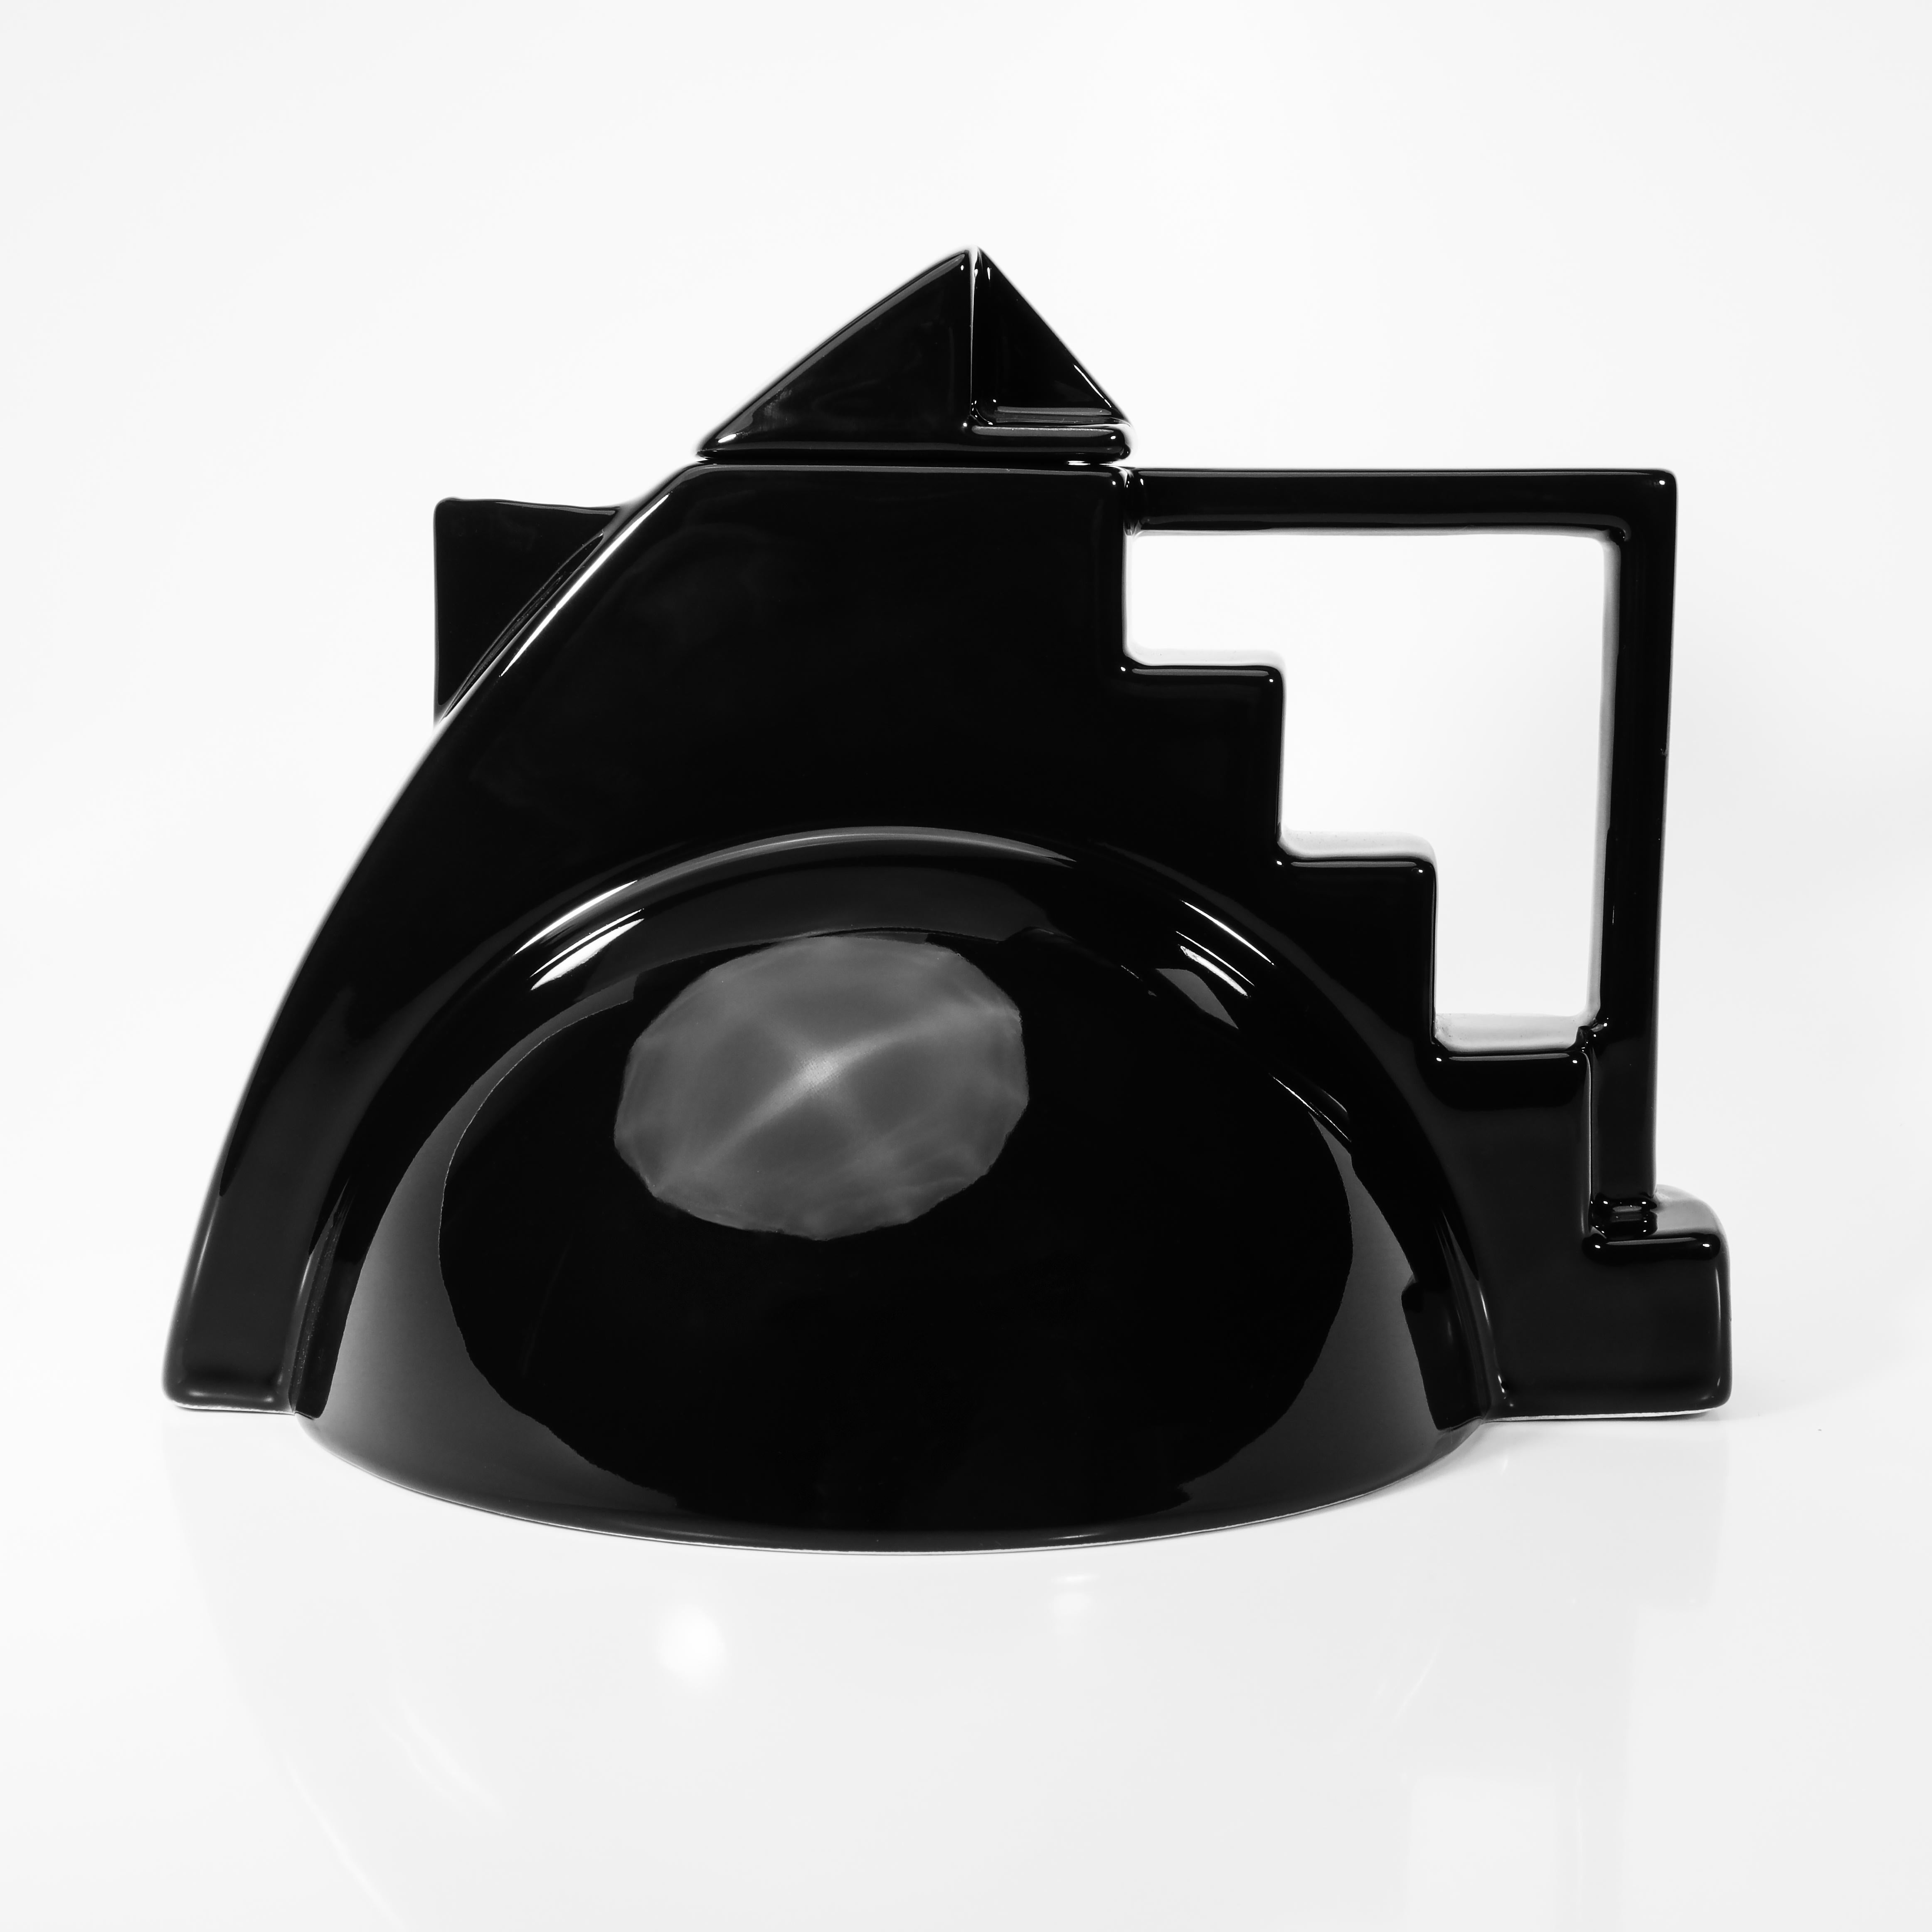 French ceramist Pierre Casenove created this coveted though elusive black Postmodern Memphis-inspired teapot in 1985 for Salins Studio France. This mint-condition teapot is 1980s design at its most iconic: note the Ziggurat profile and the glossy